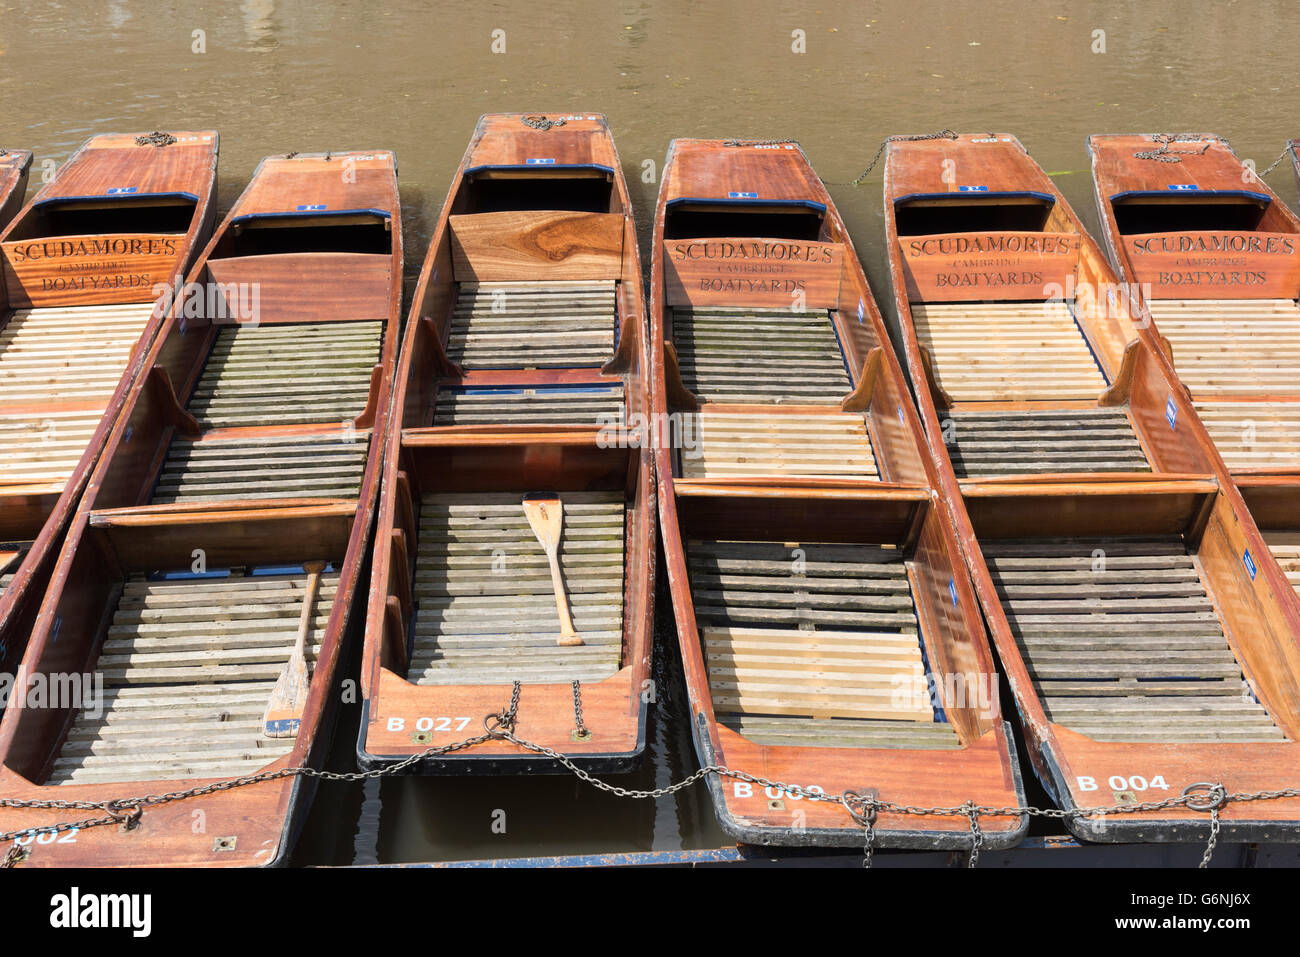 Punts moored on the River Cam in Cambridge UK owned by Scudamores Stock Photo